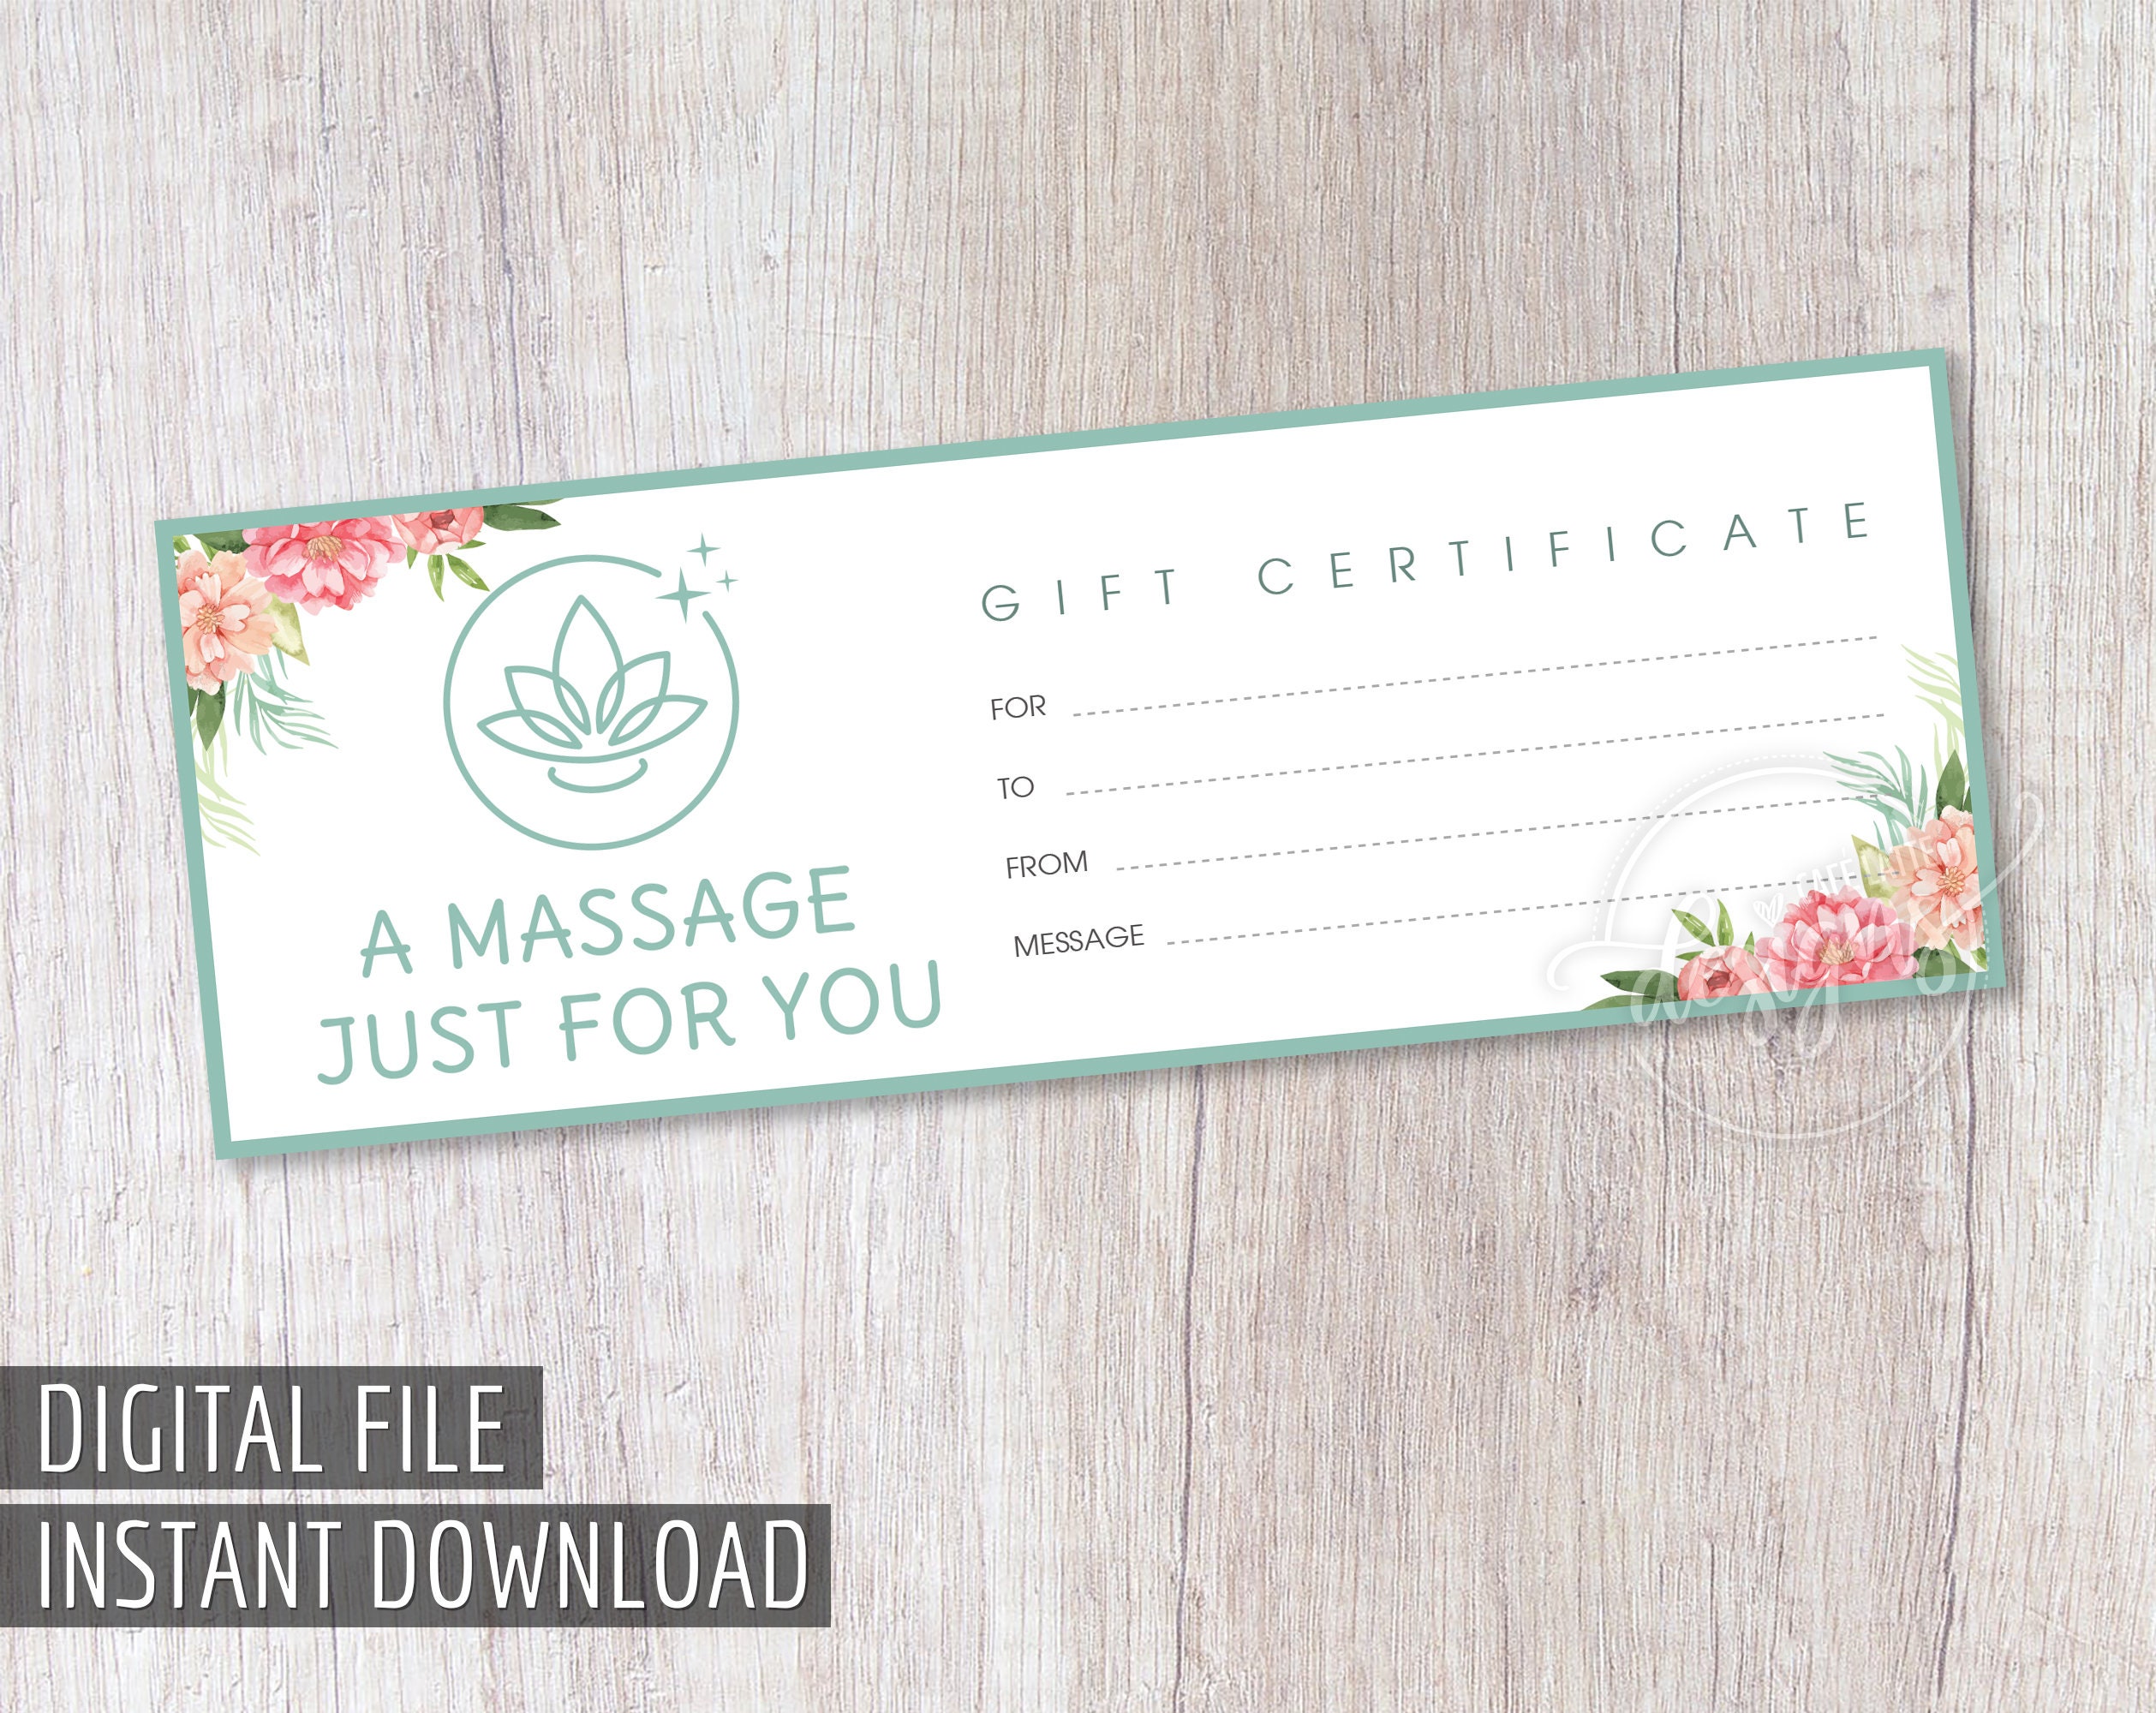 MASSAGE GIFT Certificate Valentine s Day Printable Gift Etsy 